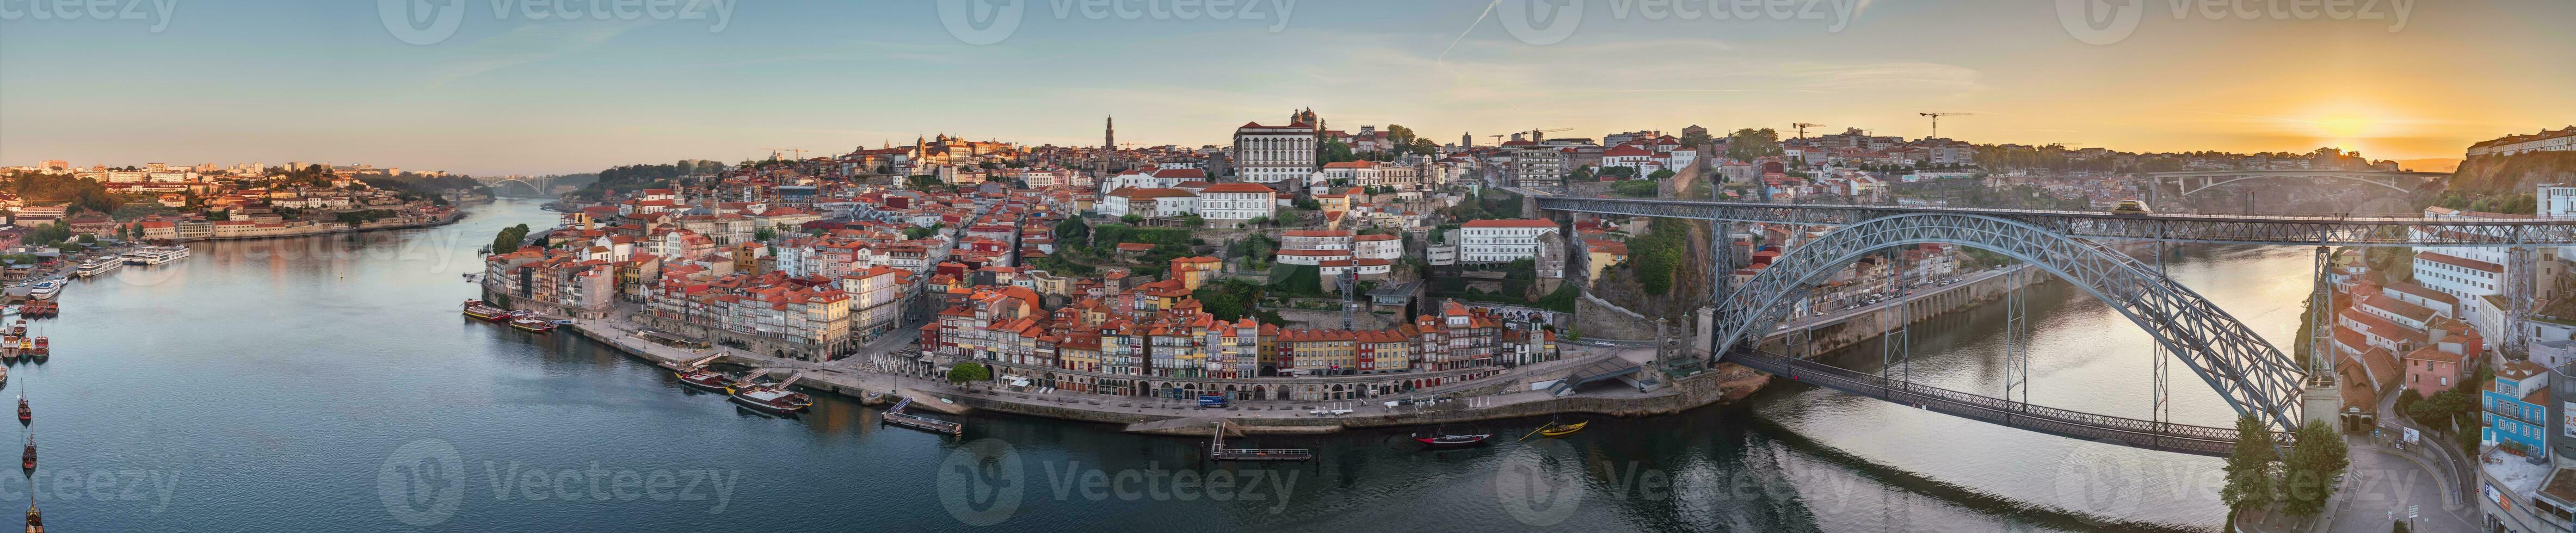 Drone panorama over the city of Porto and the Douro River at sunrise photo